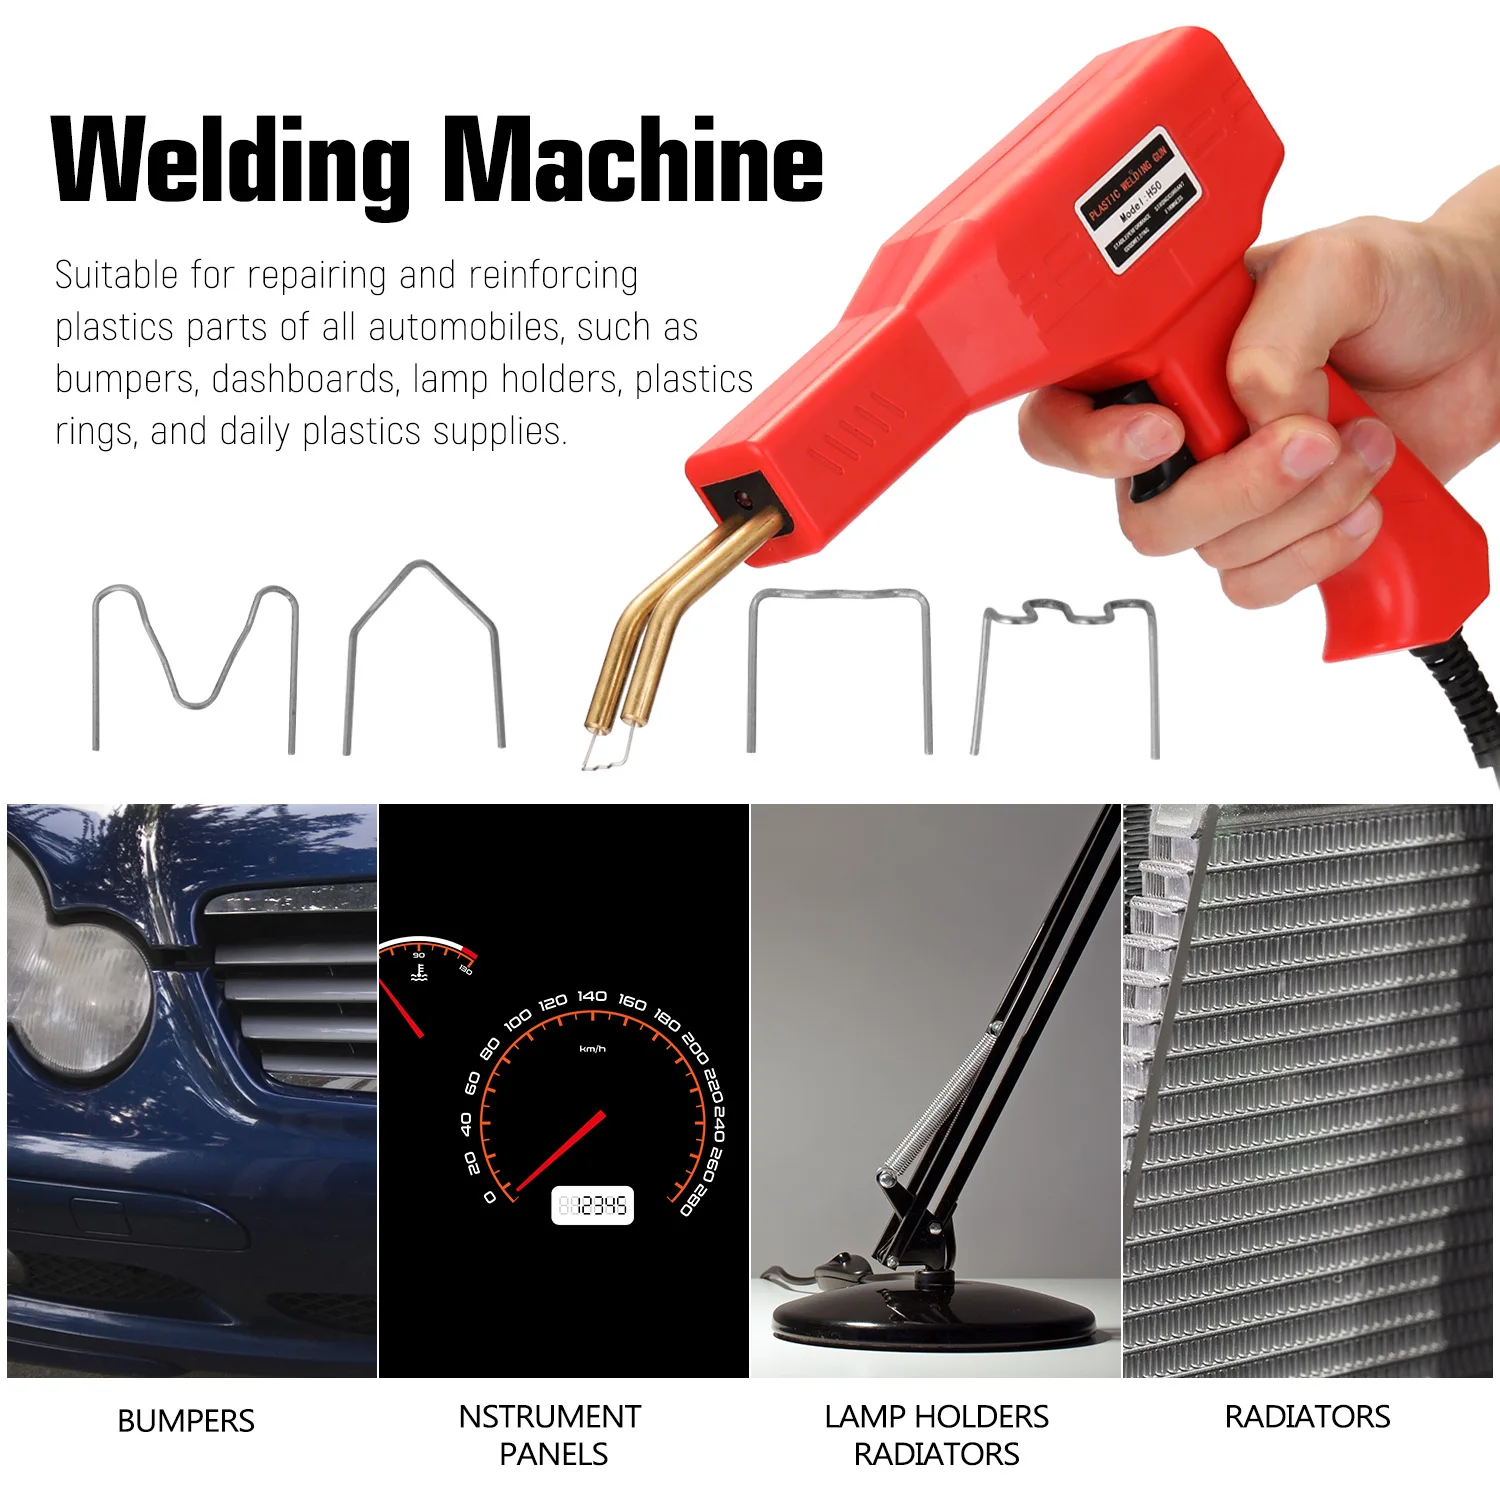 Professional Repair Welding Machine Set,Car Bumper Crack Repair Welding Machine Set,for Repairing and Reinforcing All Automotive Plastic and Auto Body Dent Removal 